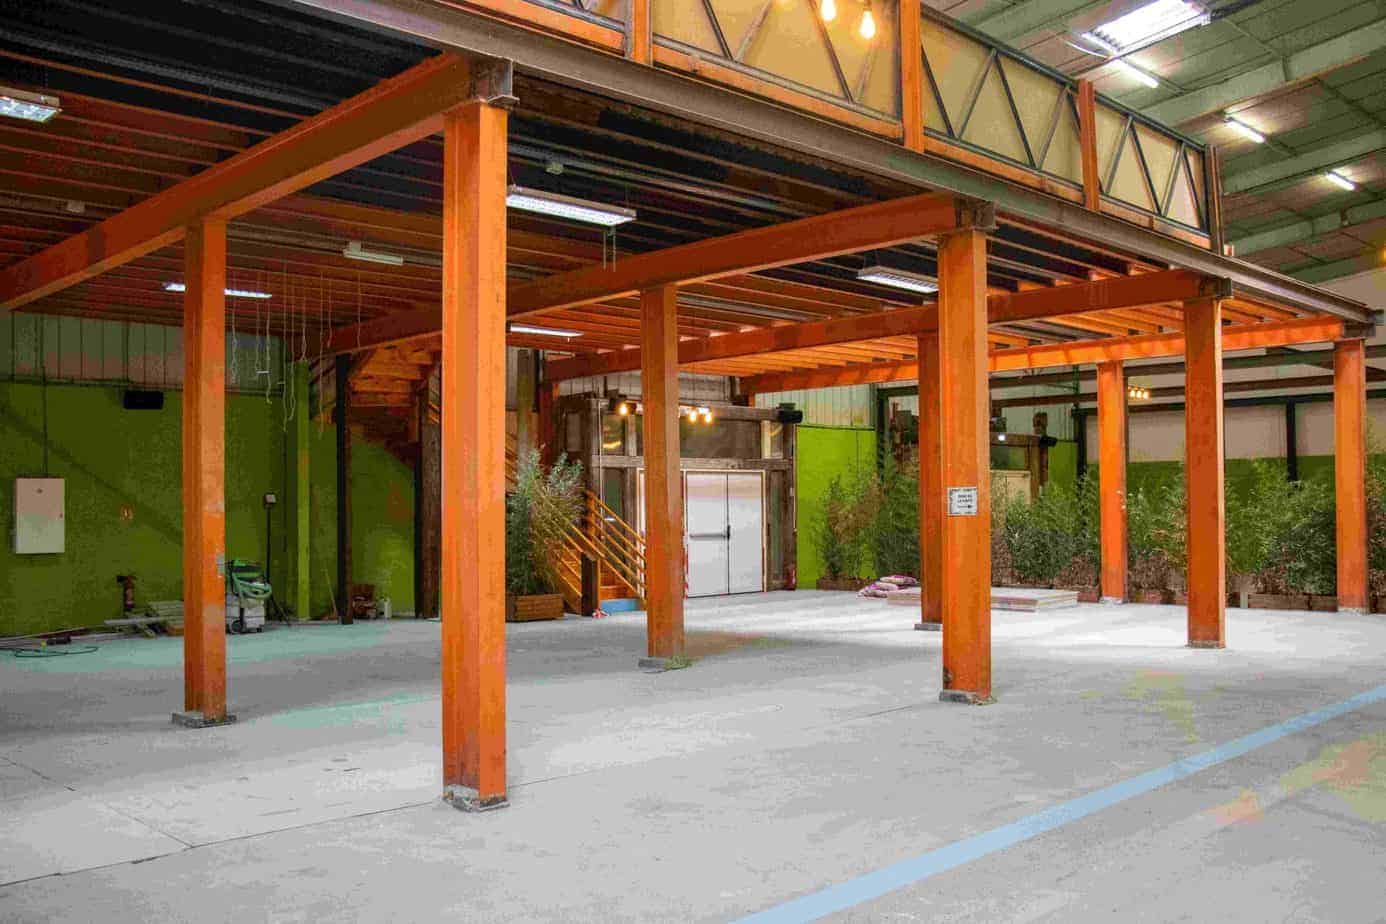 Multipurpose venue with an industrial character in Paris. Industrial open space with colourful walls.